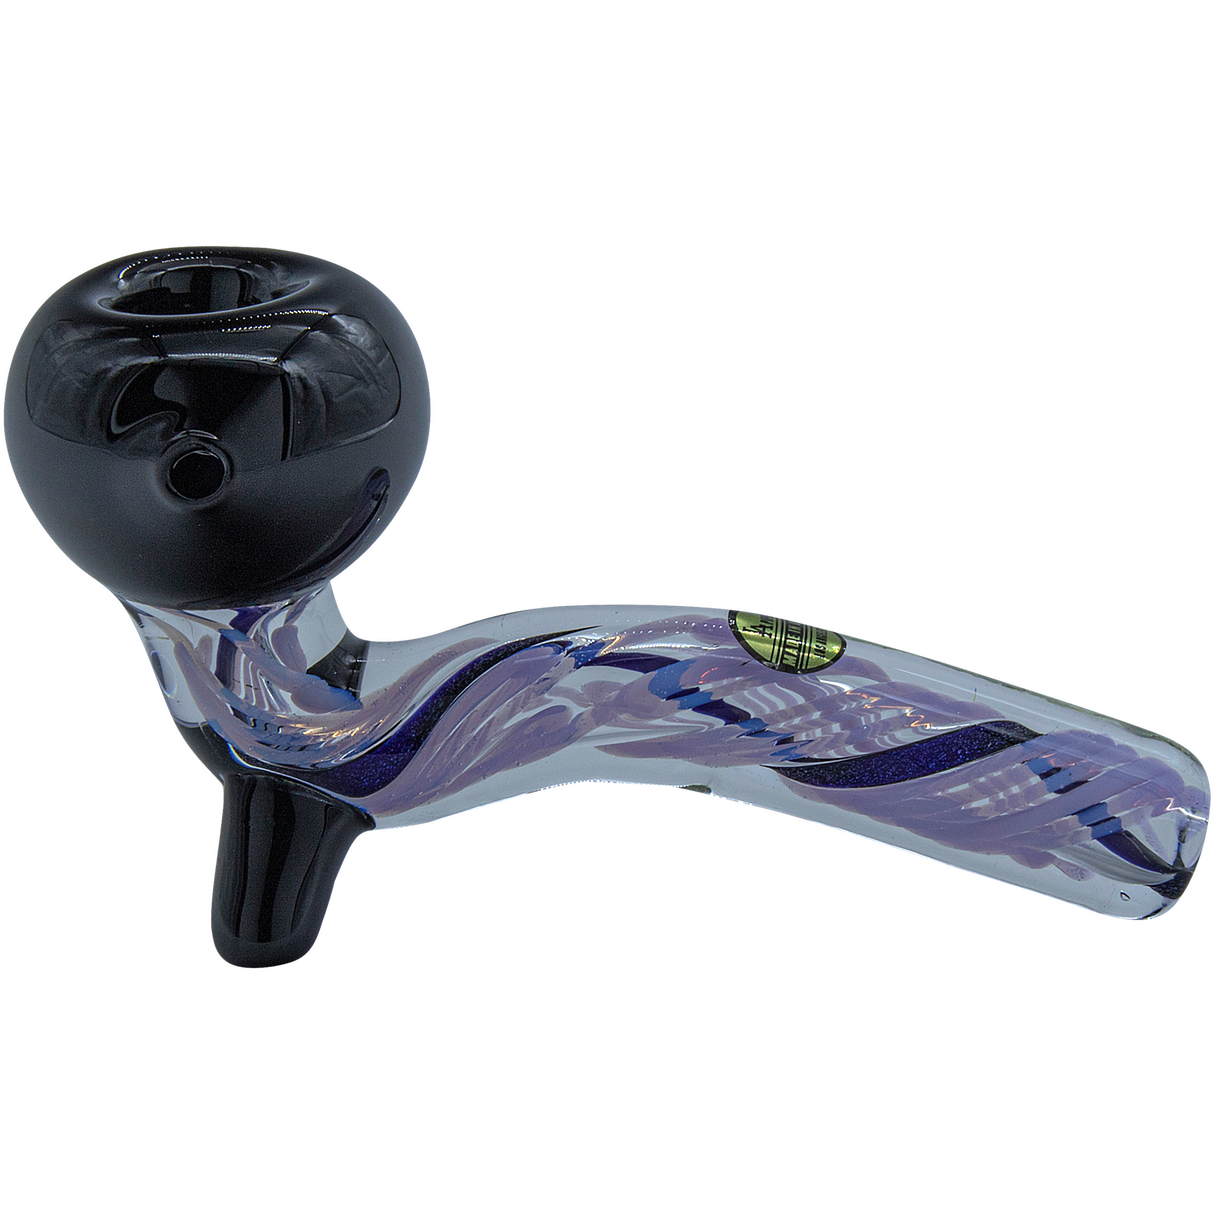 LA Pipes "Galactic Storm" Slime & Dichro Sherlock Pipe, USA-made, side angle on white